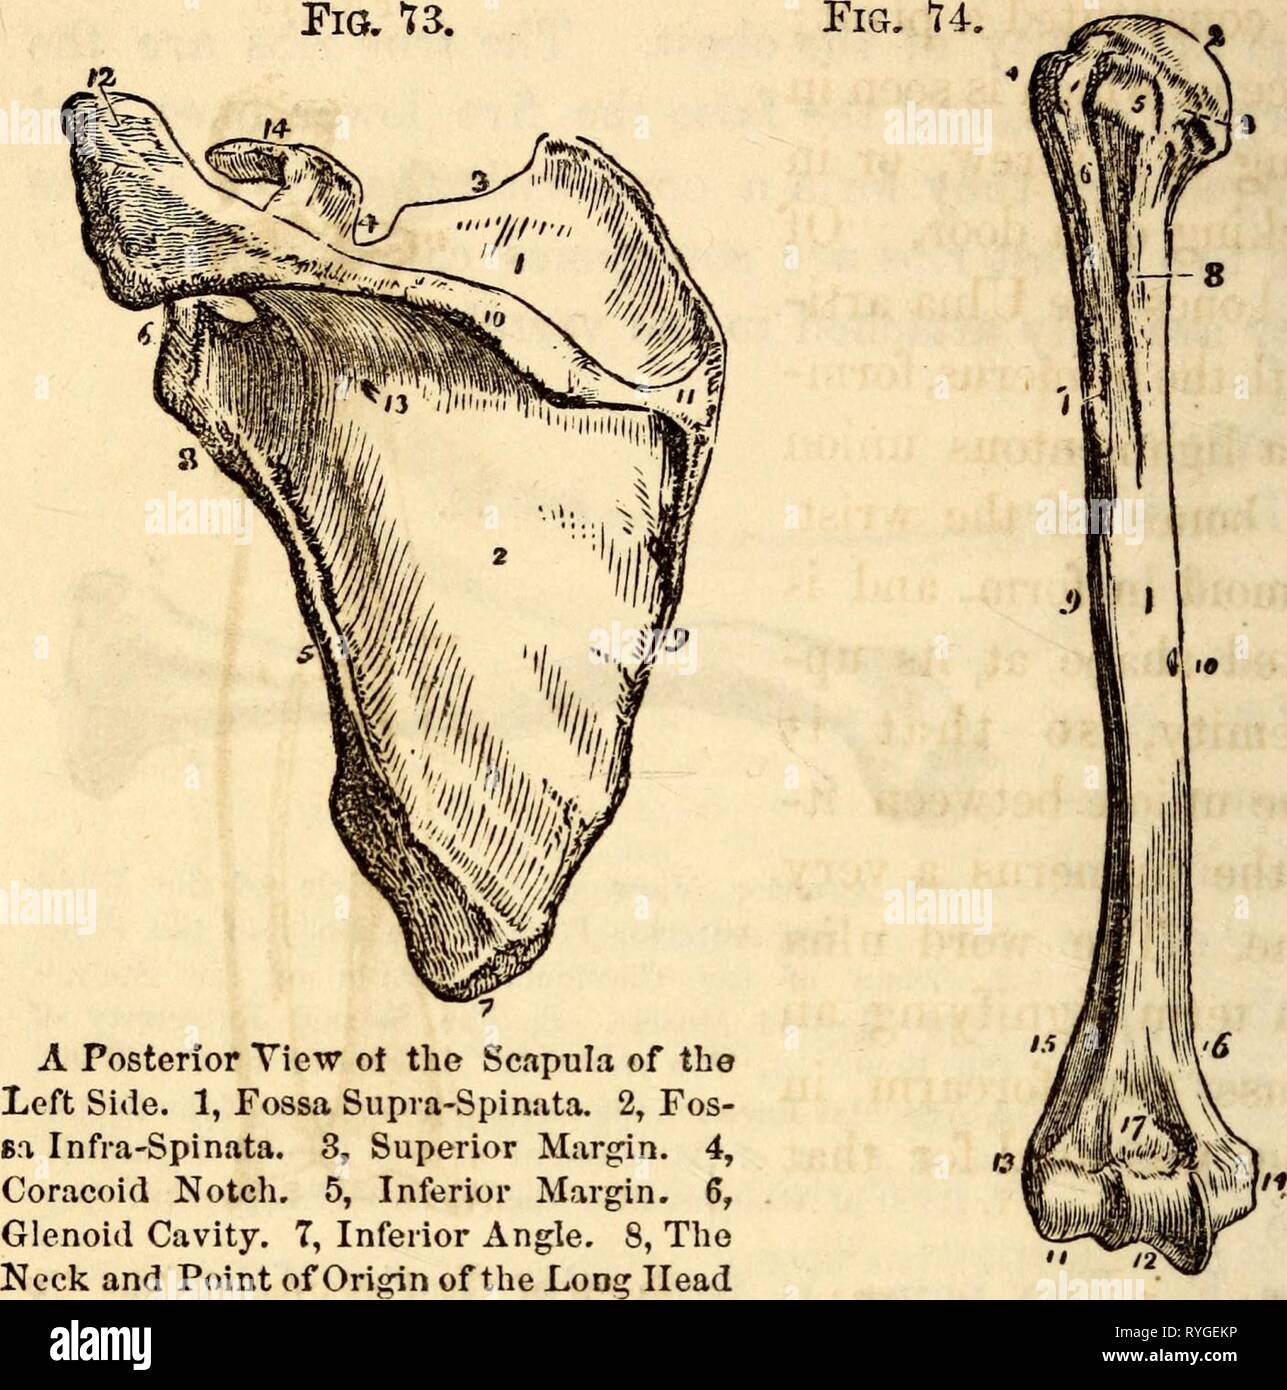 Elementary anatomy and physiology : for colleges, academies, and other schools  elementaryanato00hitc Year: 1869  58 H I T C II C O C K ' S ANATOMY    of the Triceps Muscle. 9, Posterior, or An Anterior View of the Humerus of th« Vertebral Margin. 10, The Spine. 11, Eight Side. 1, The Shaft, or Diaphysis of Smooth Facet for the Trapezius Muscle. the Bone. 2, The Head. 3, Anatomical 12, Acromion Process. 13, Nutritious Fo- Neck. 4, Greater Tuberosity. 5, Lesser raraen. 14, Coracoid Process. 15, Part of Tuberosity. 6, The Bicipital Groove. 7, the Origin of the Deltoid Muscle. External Bicipital  Stock Photo